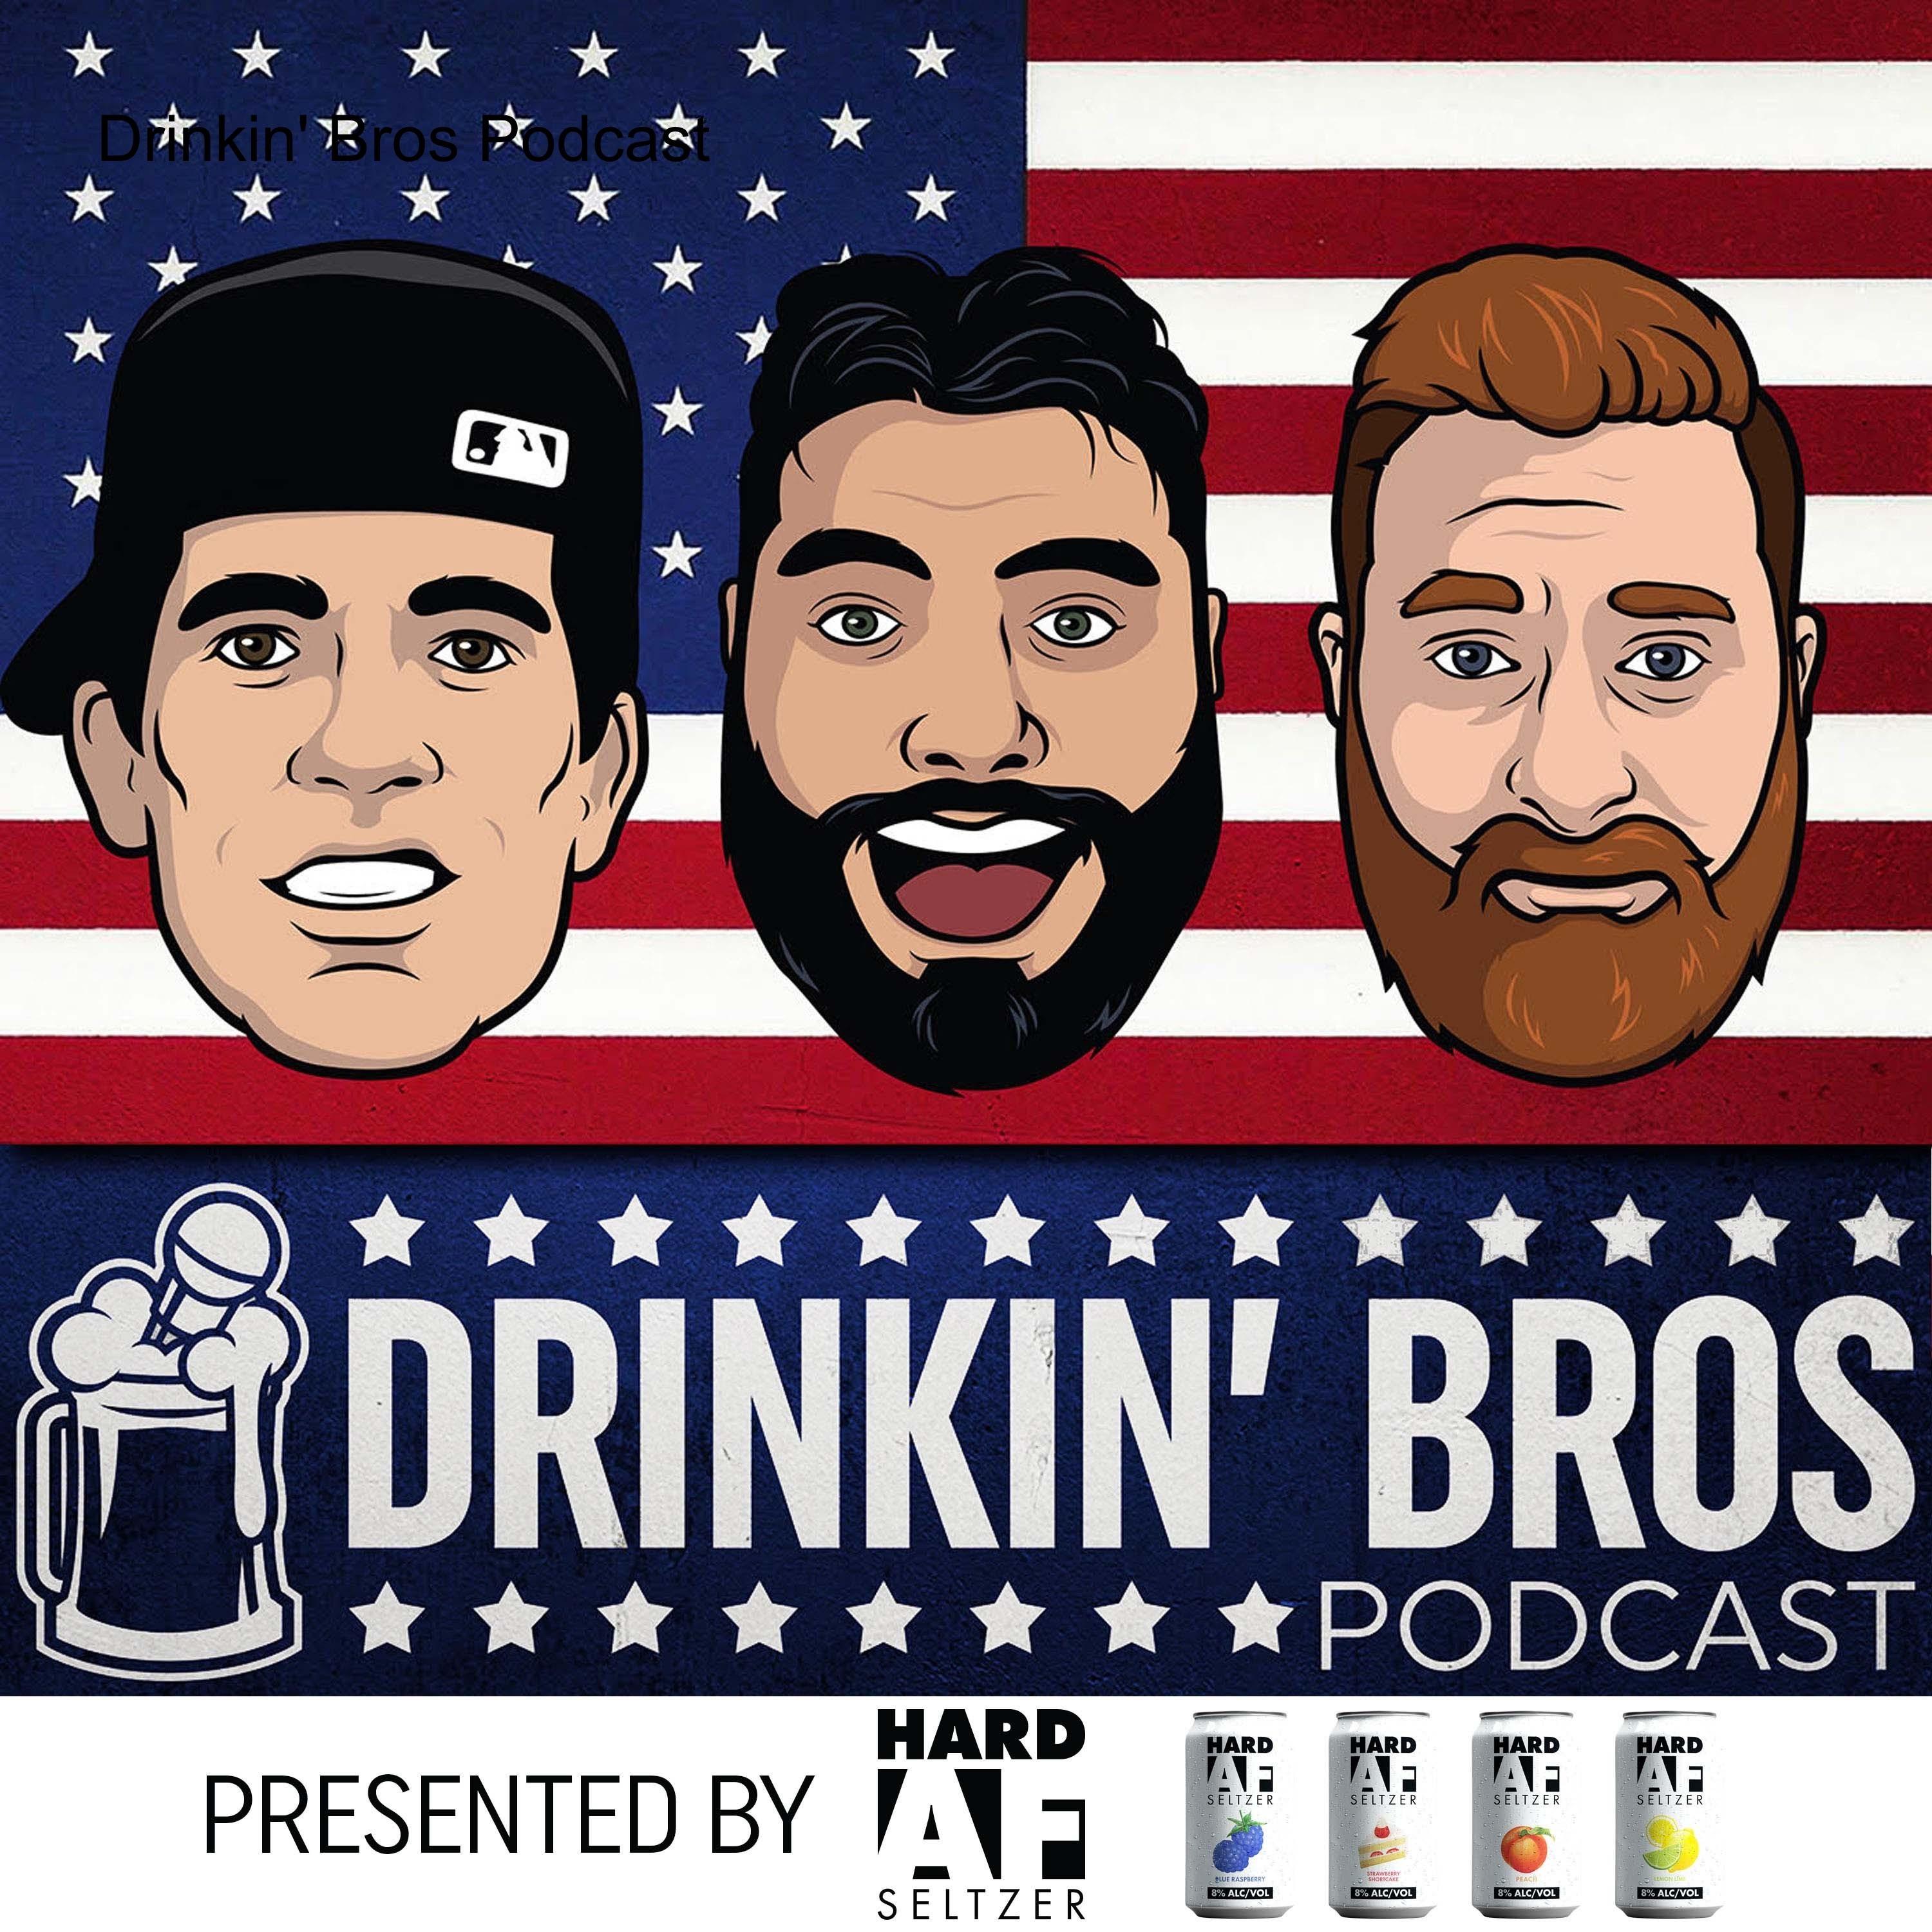 Drinkin' Bros Podcast | RedCircle